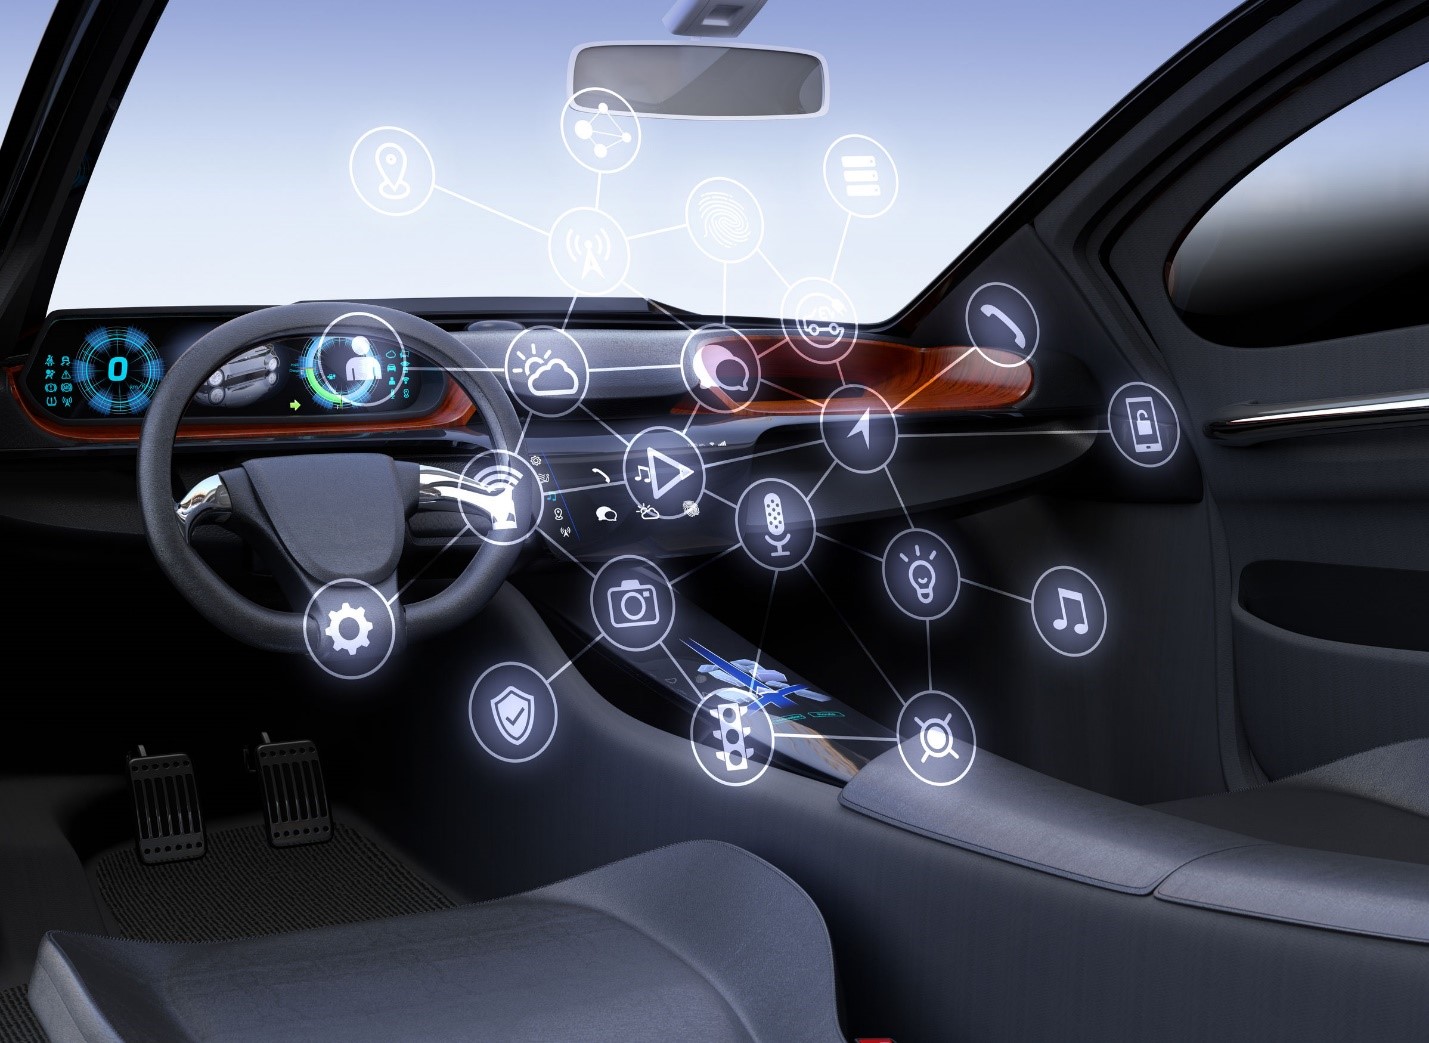 Global Automotive Internet of Things Market by Companies Apple, Inc, AT&T Inc, Audi AG, Cisco Systems, Inc, Ford Motor Company, General Motors, Google Inc, Intel Corporation, International Business Machines Corporation, Microsoft Corporation, NXP Semicond